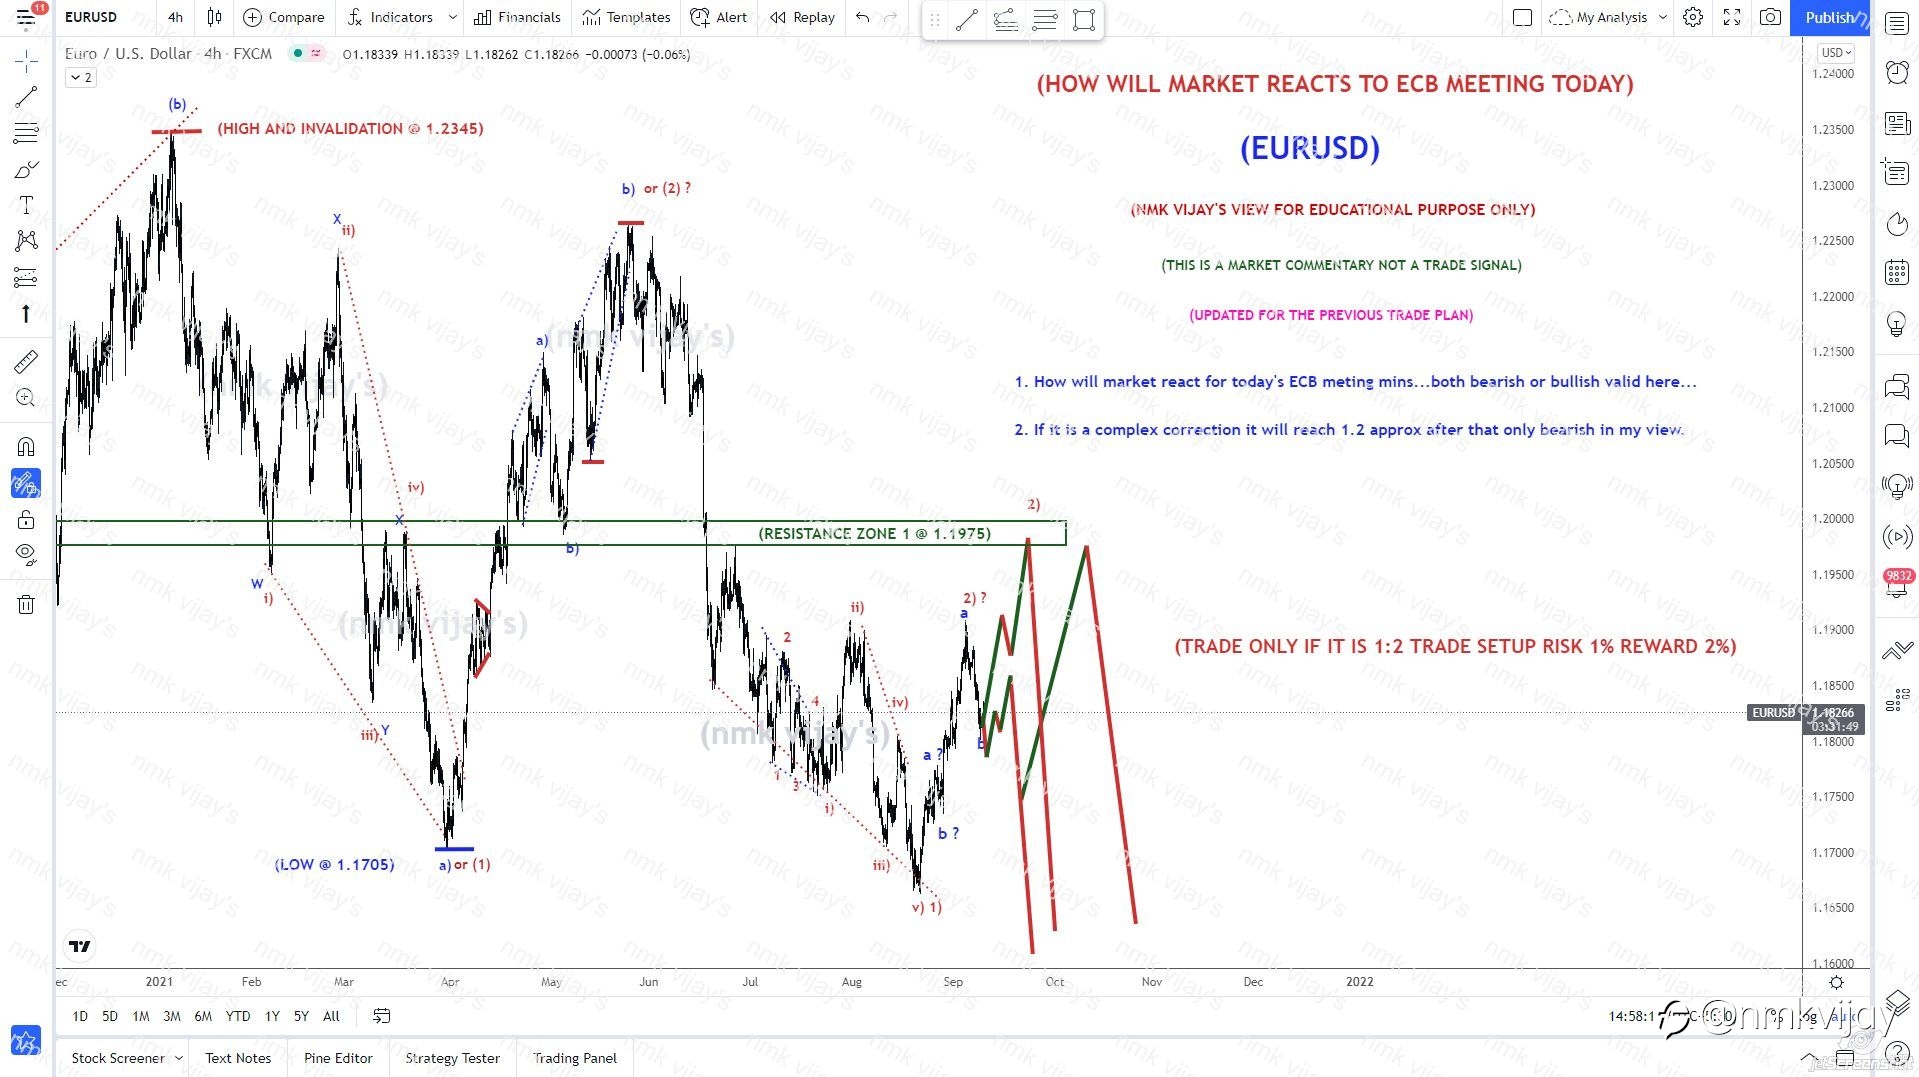 EURUSD-Both Bull or Bear is valid here will reach 1.2 for 2) ?